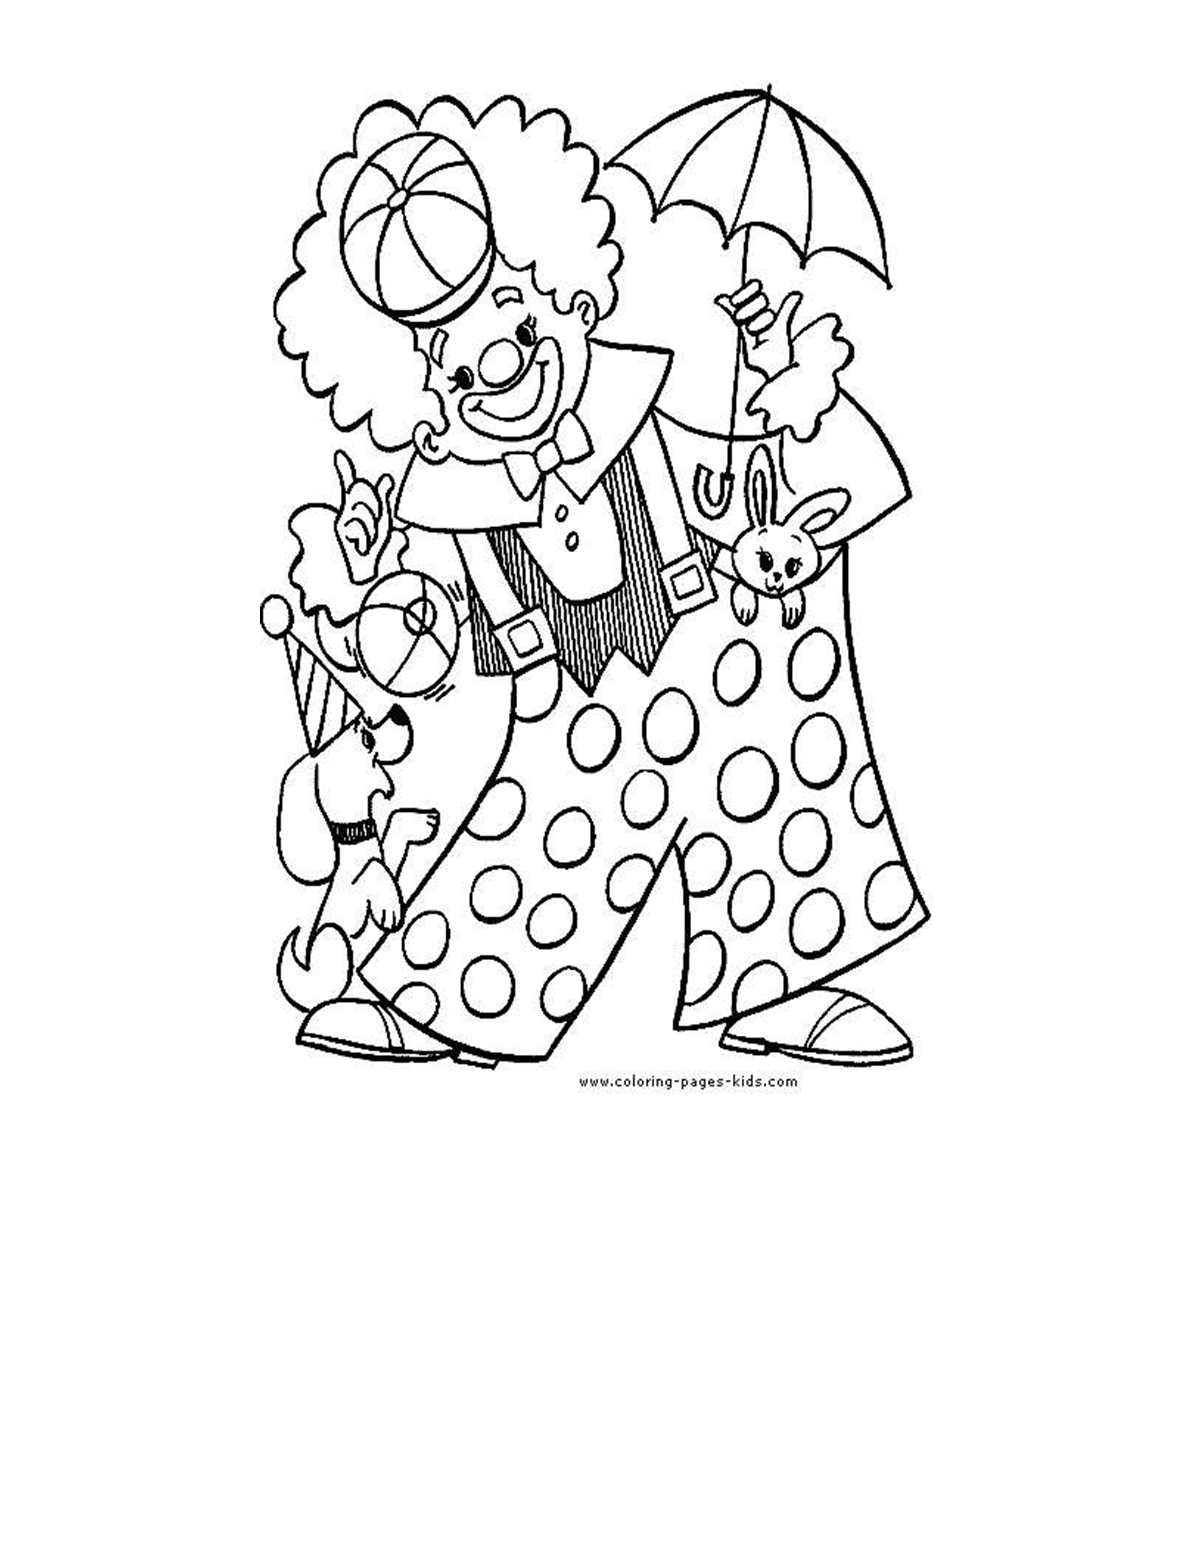 Clown Colouring Page